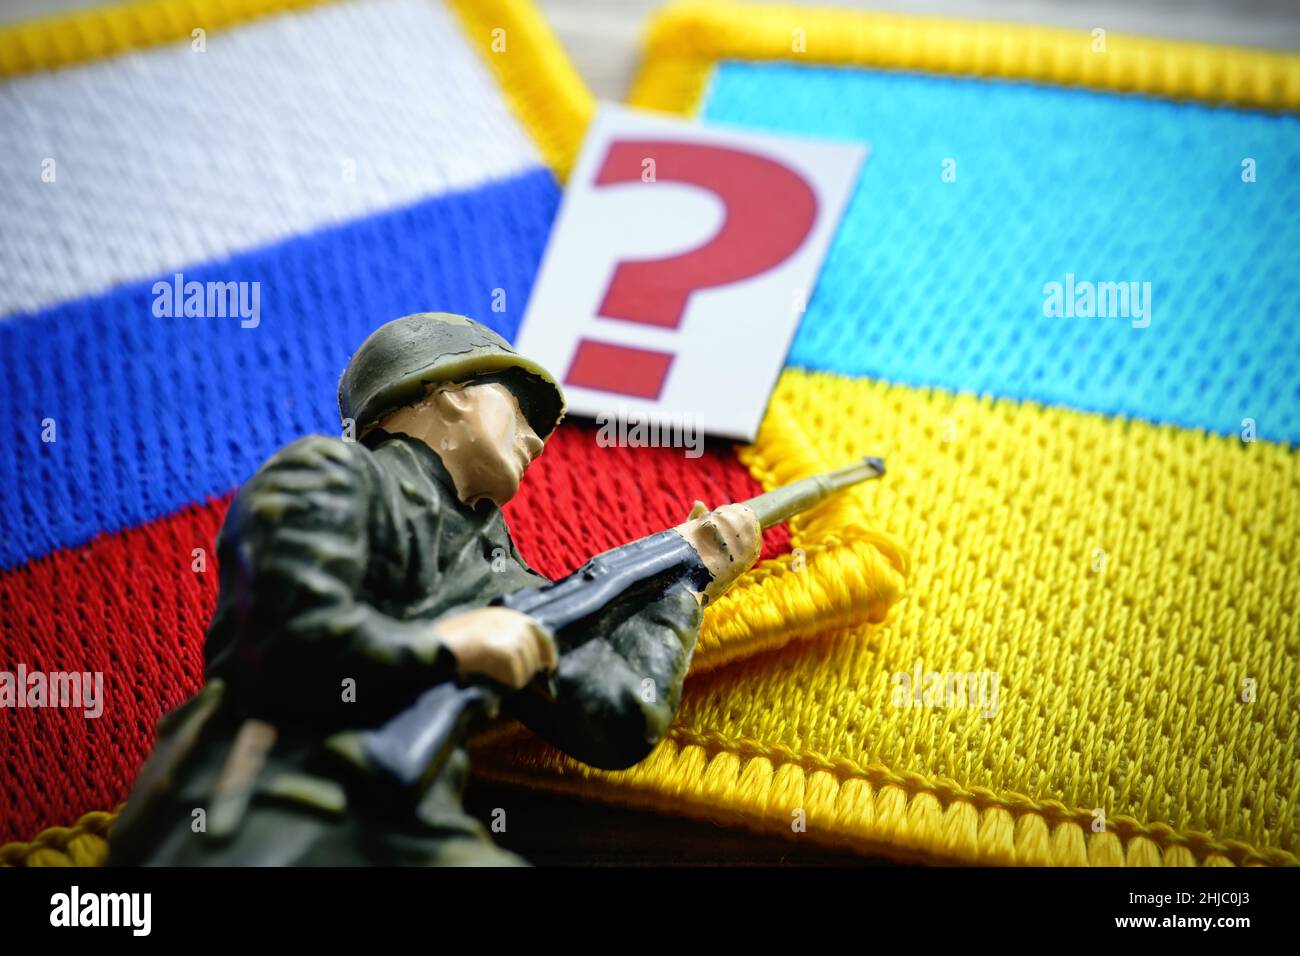 Soldier figure and question mark on flags of Russia and Ukraine, Ukraine crisis Stock Photo